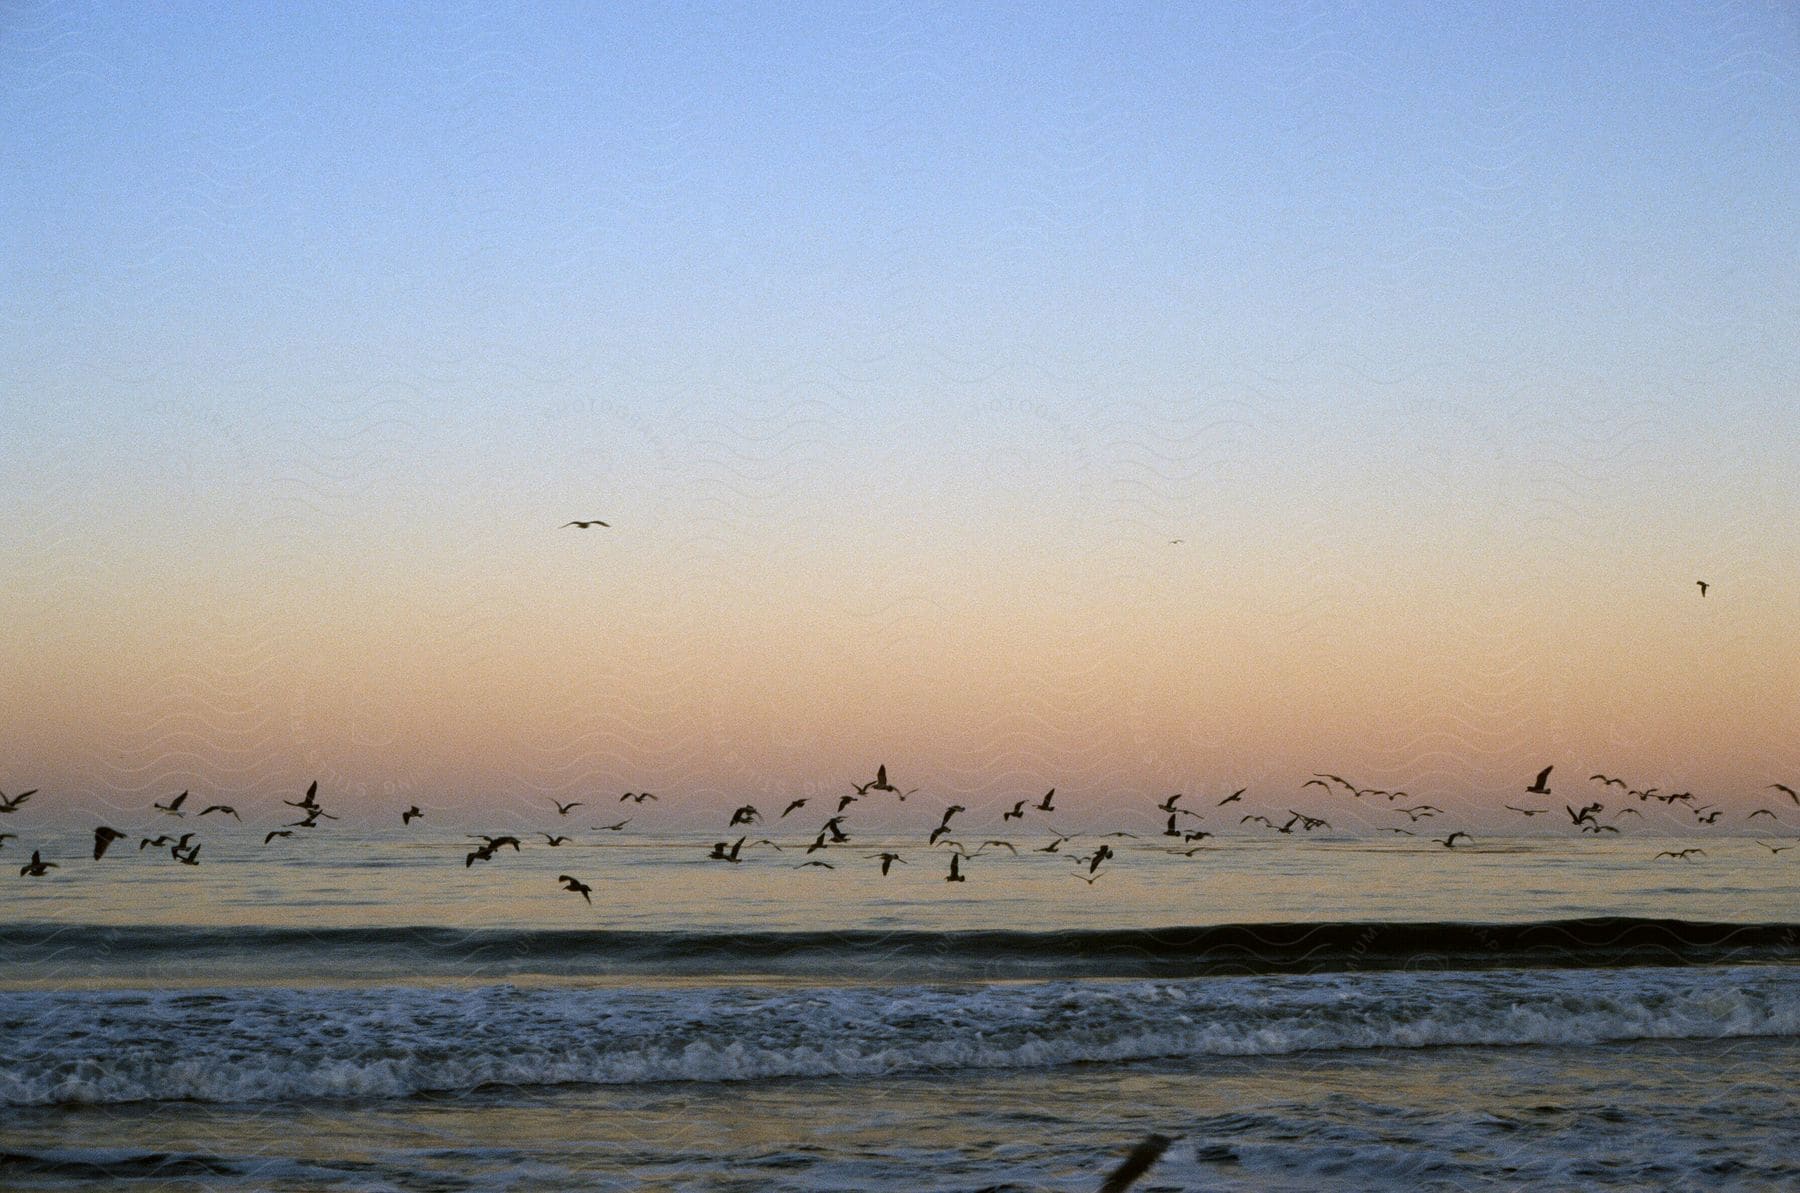 Stock photo of a group of sea gulls flying near the beach at sunset